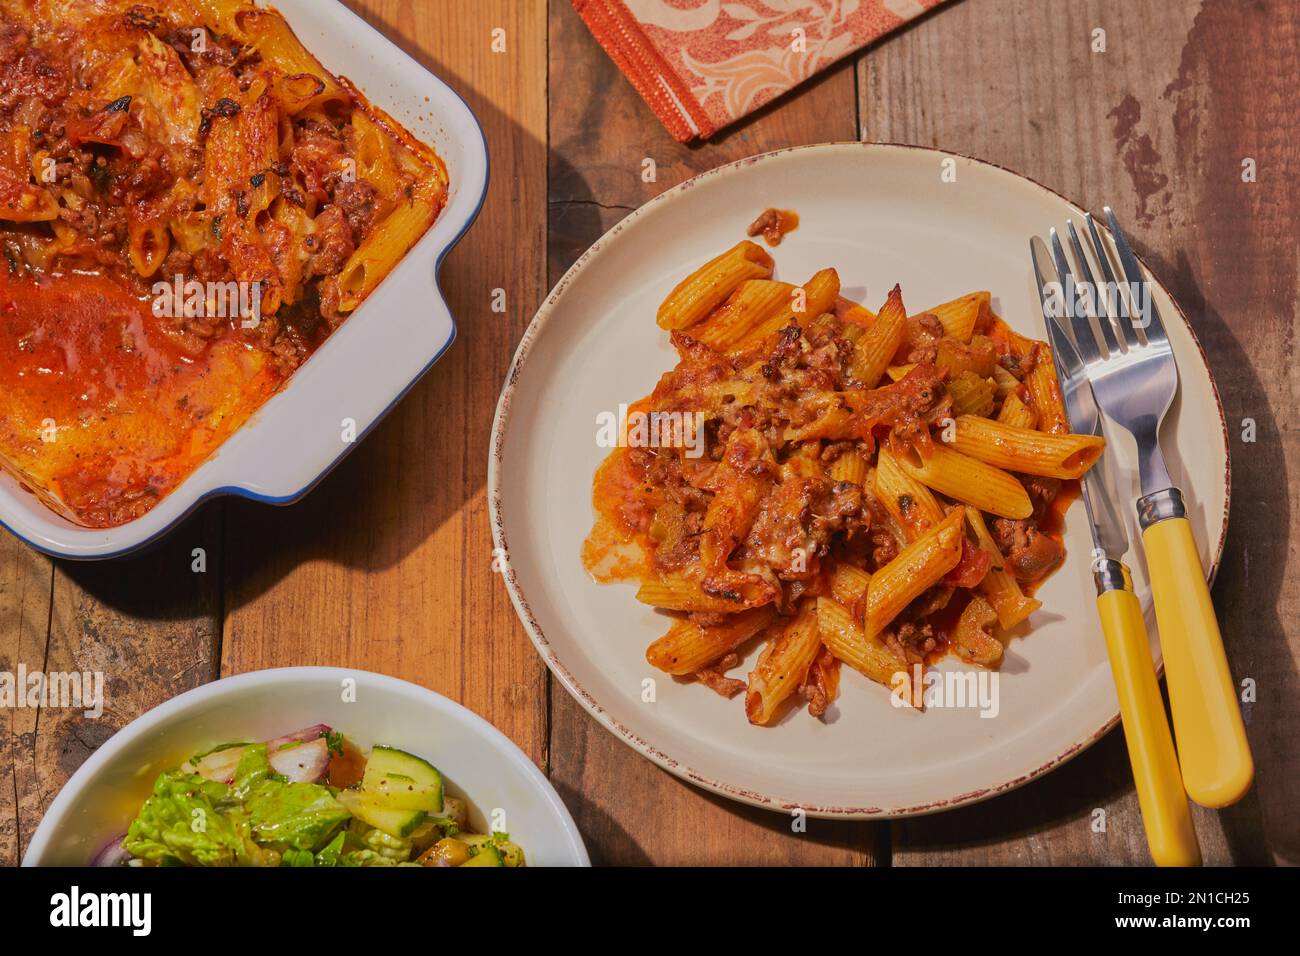 Top view of minced beef pasta bake with salad. Stock Photo